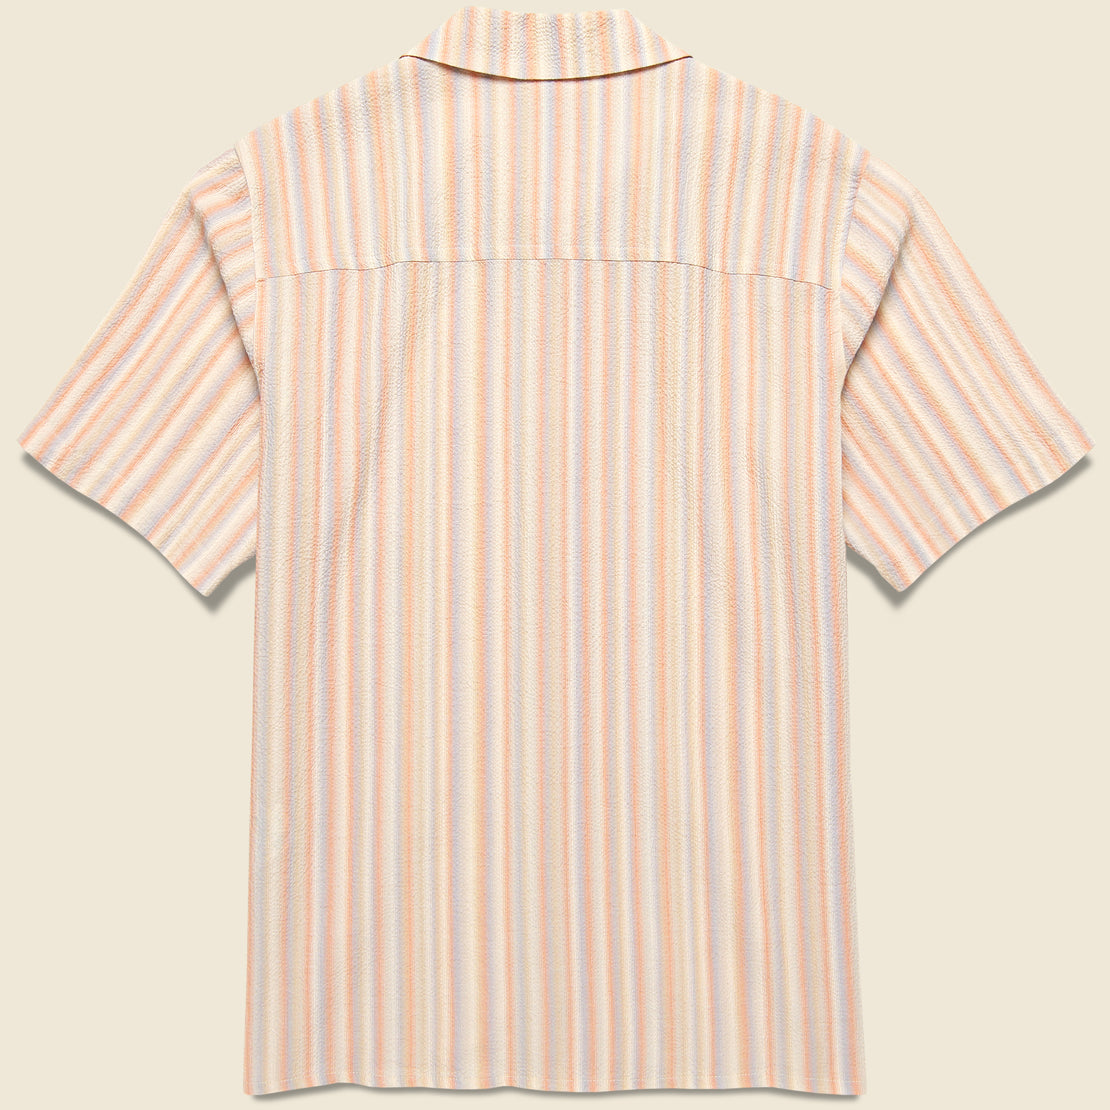 Didcot Pastel Stripe Shirt - Pastel Pink/White - Wax London - STAG Provisions - Tops - S/S Woven - Stripe